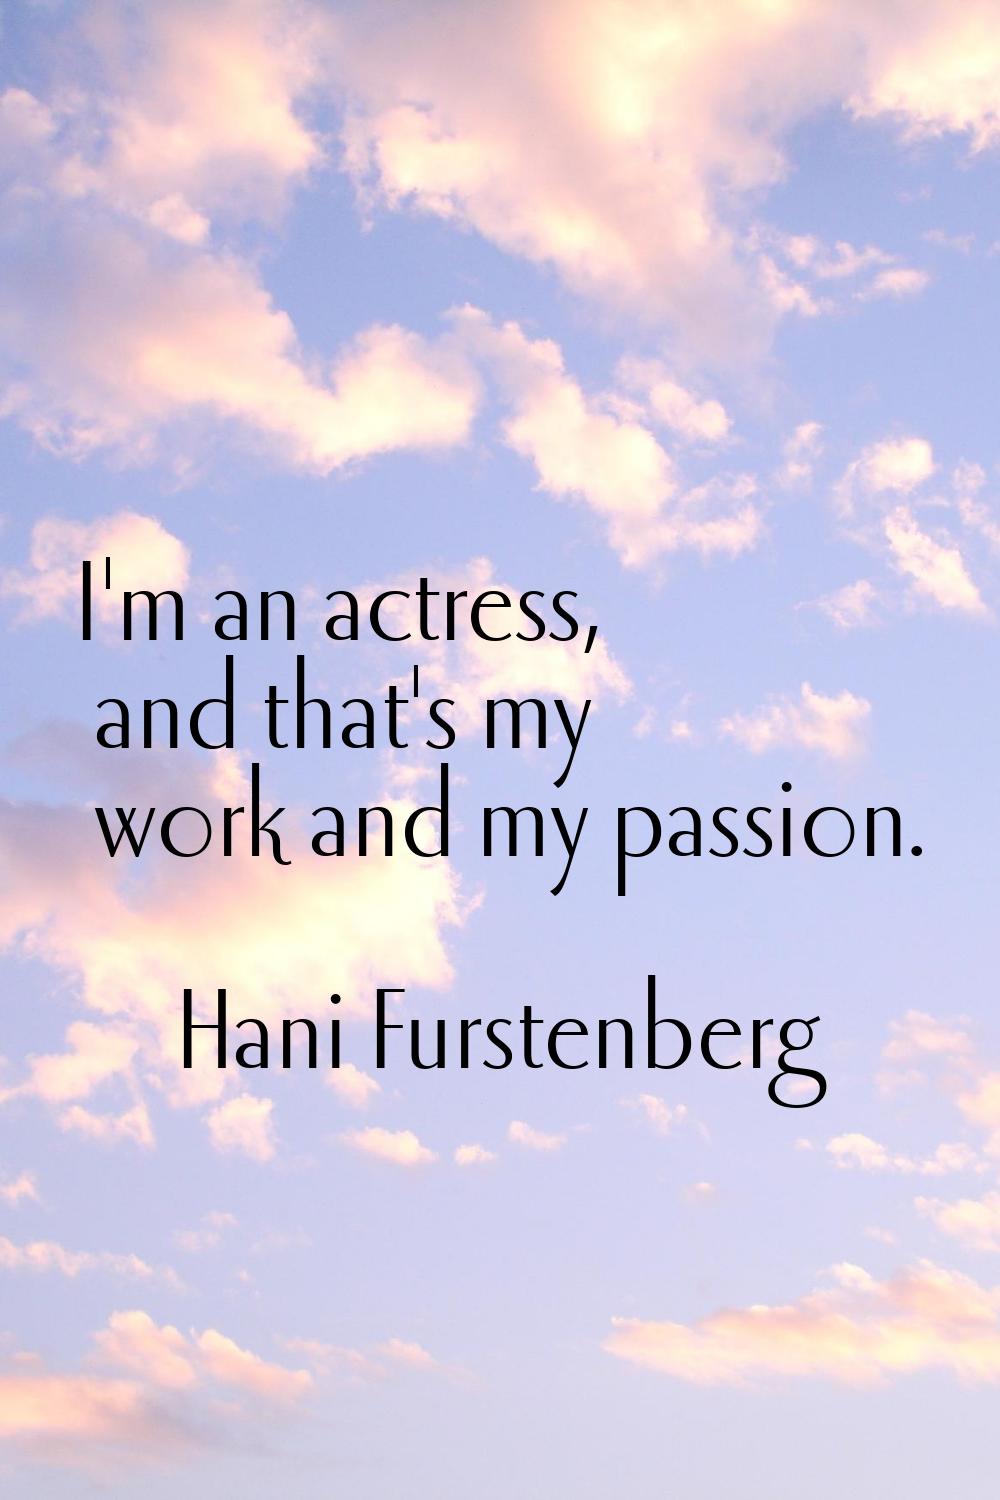 I'm an actress, and that's my work and my passion.